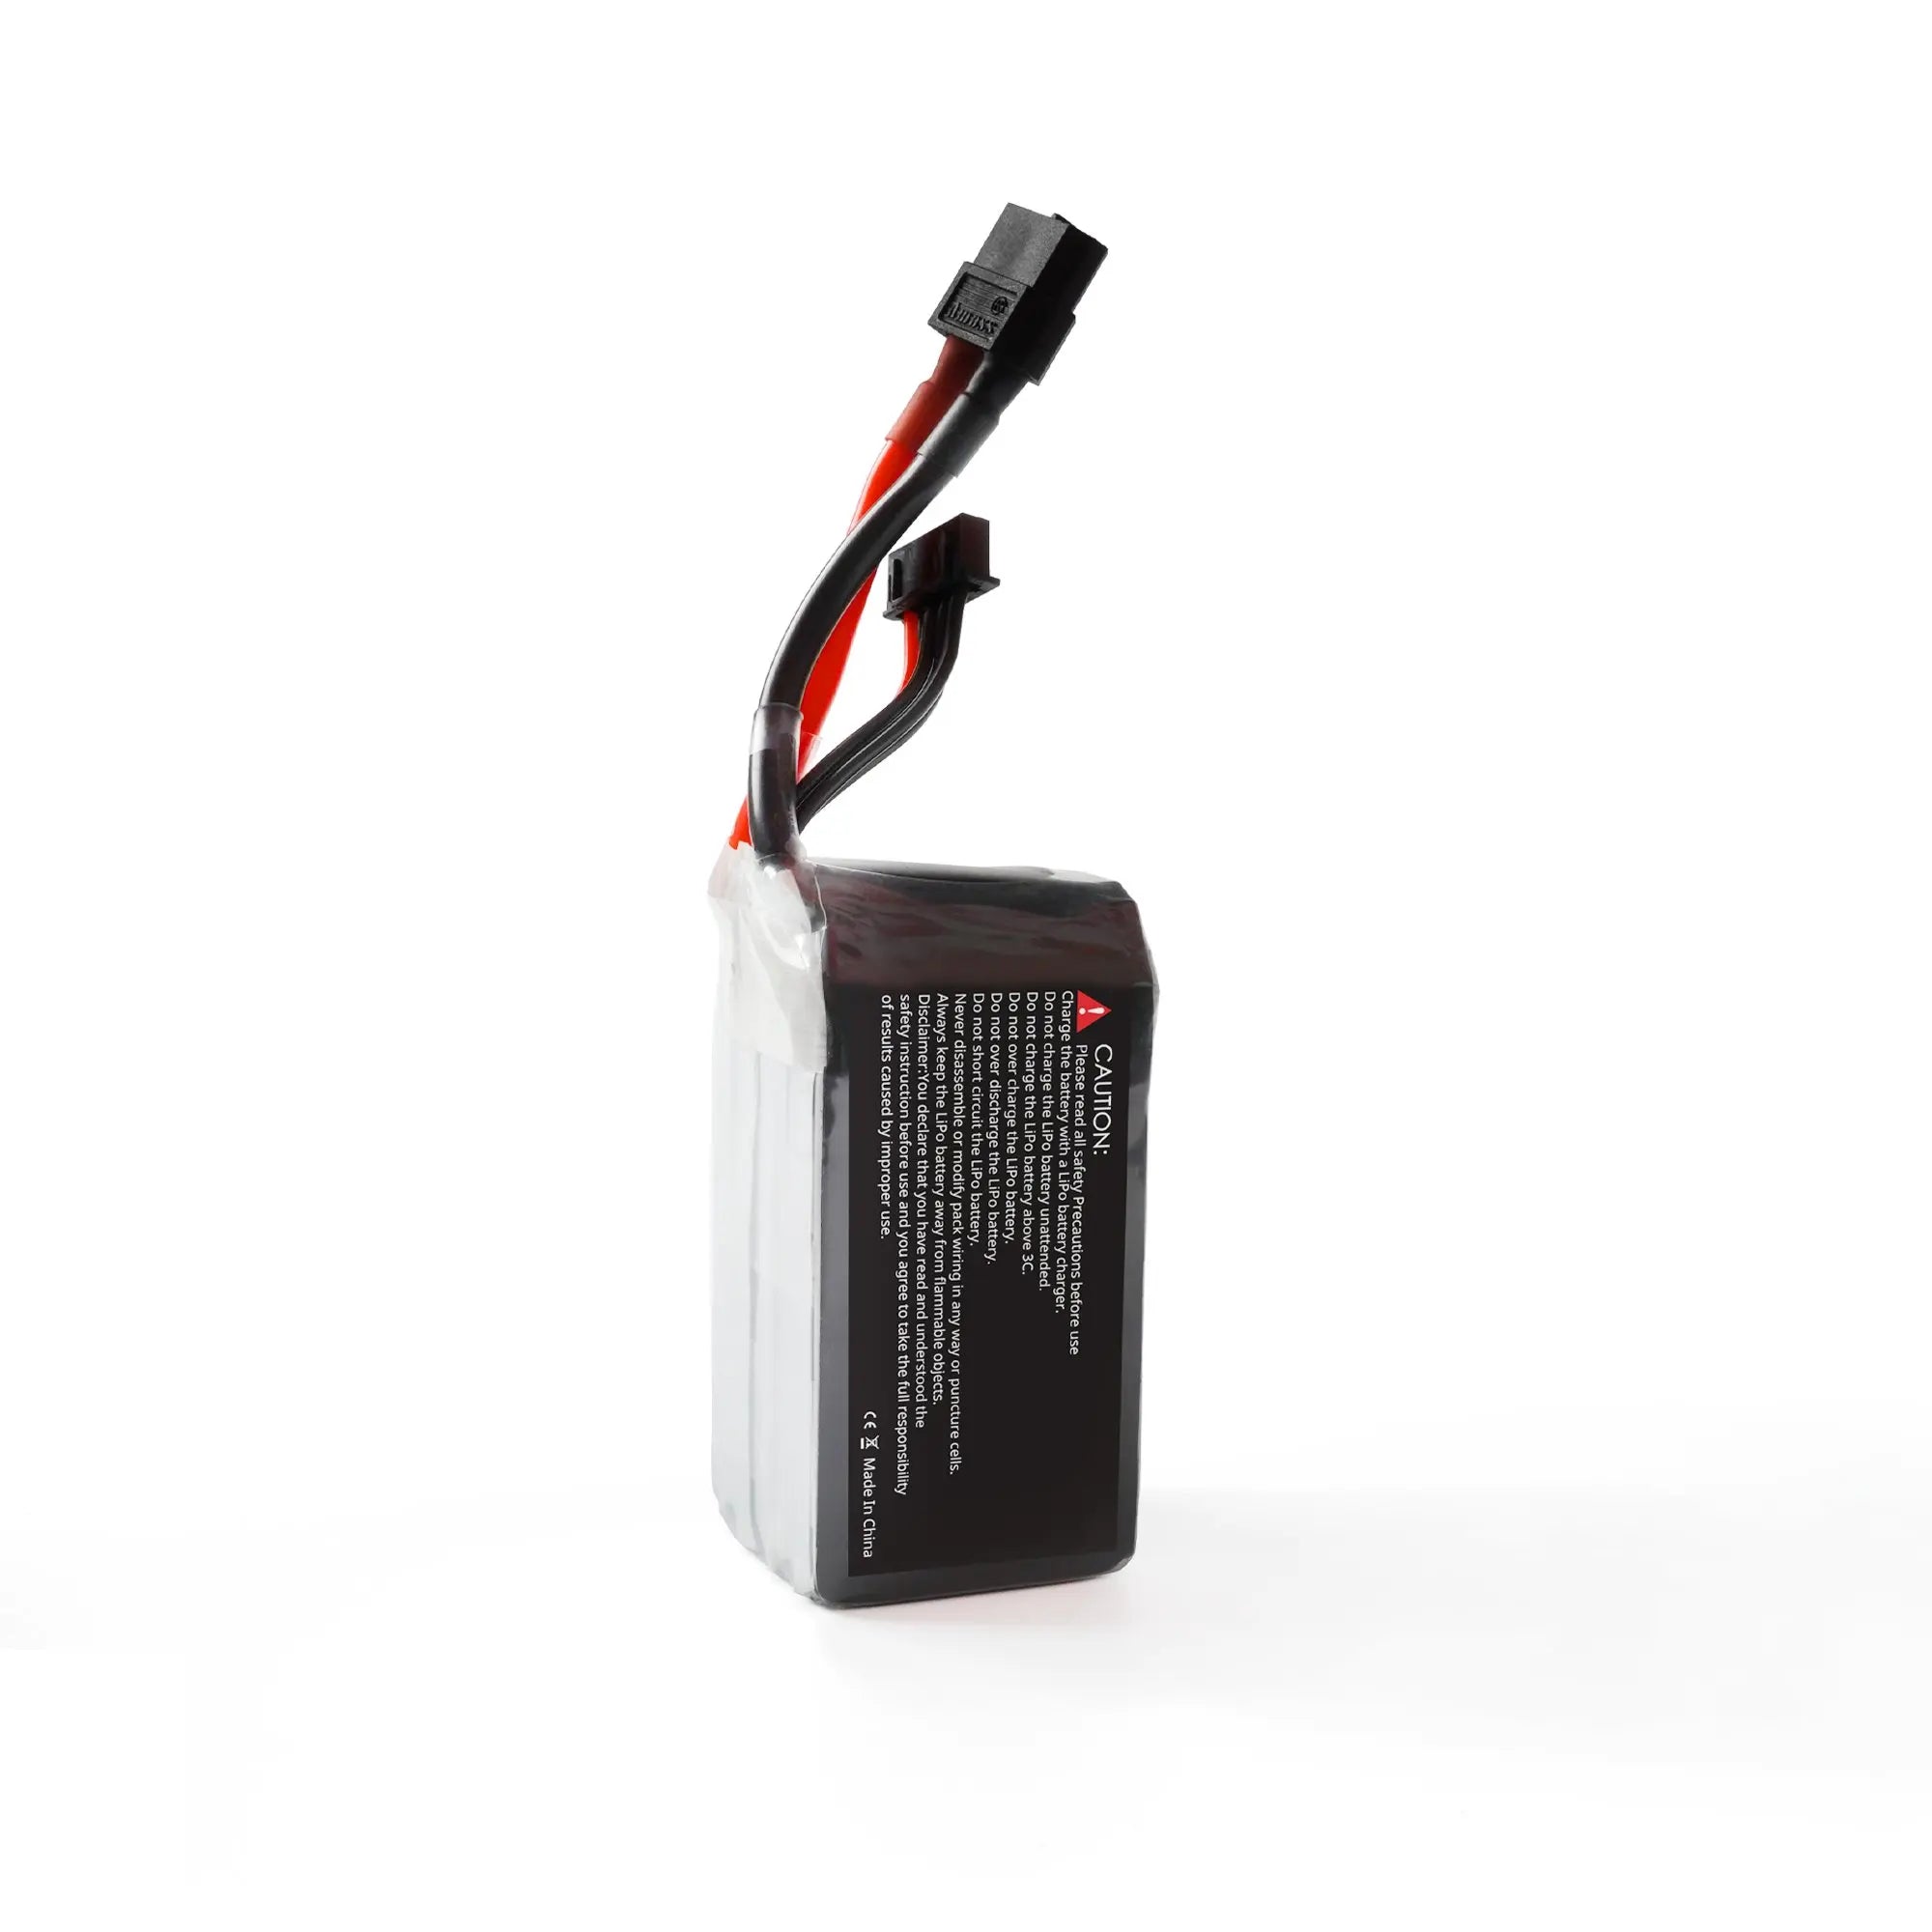 GEPRC Storm 4S 2000mAh 120C Lipo Battery, A: It is recommended to use the HOTA D6 PRO charger, ISDT 608